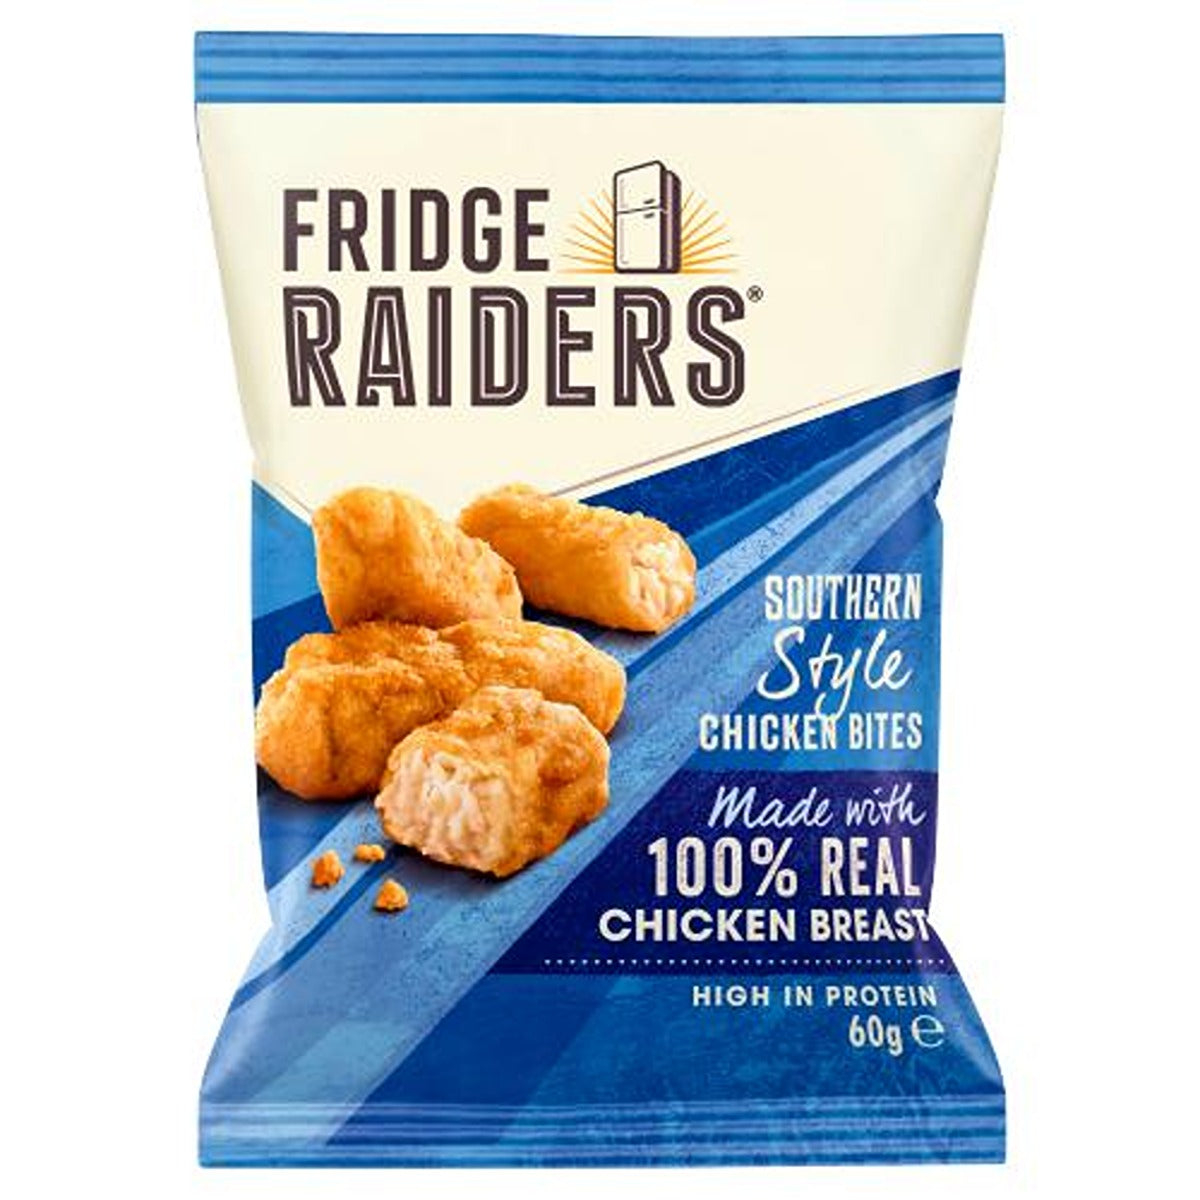 Fridge Raiders - Southern Style Chicken Bites - 60g - Continental Food Store